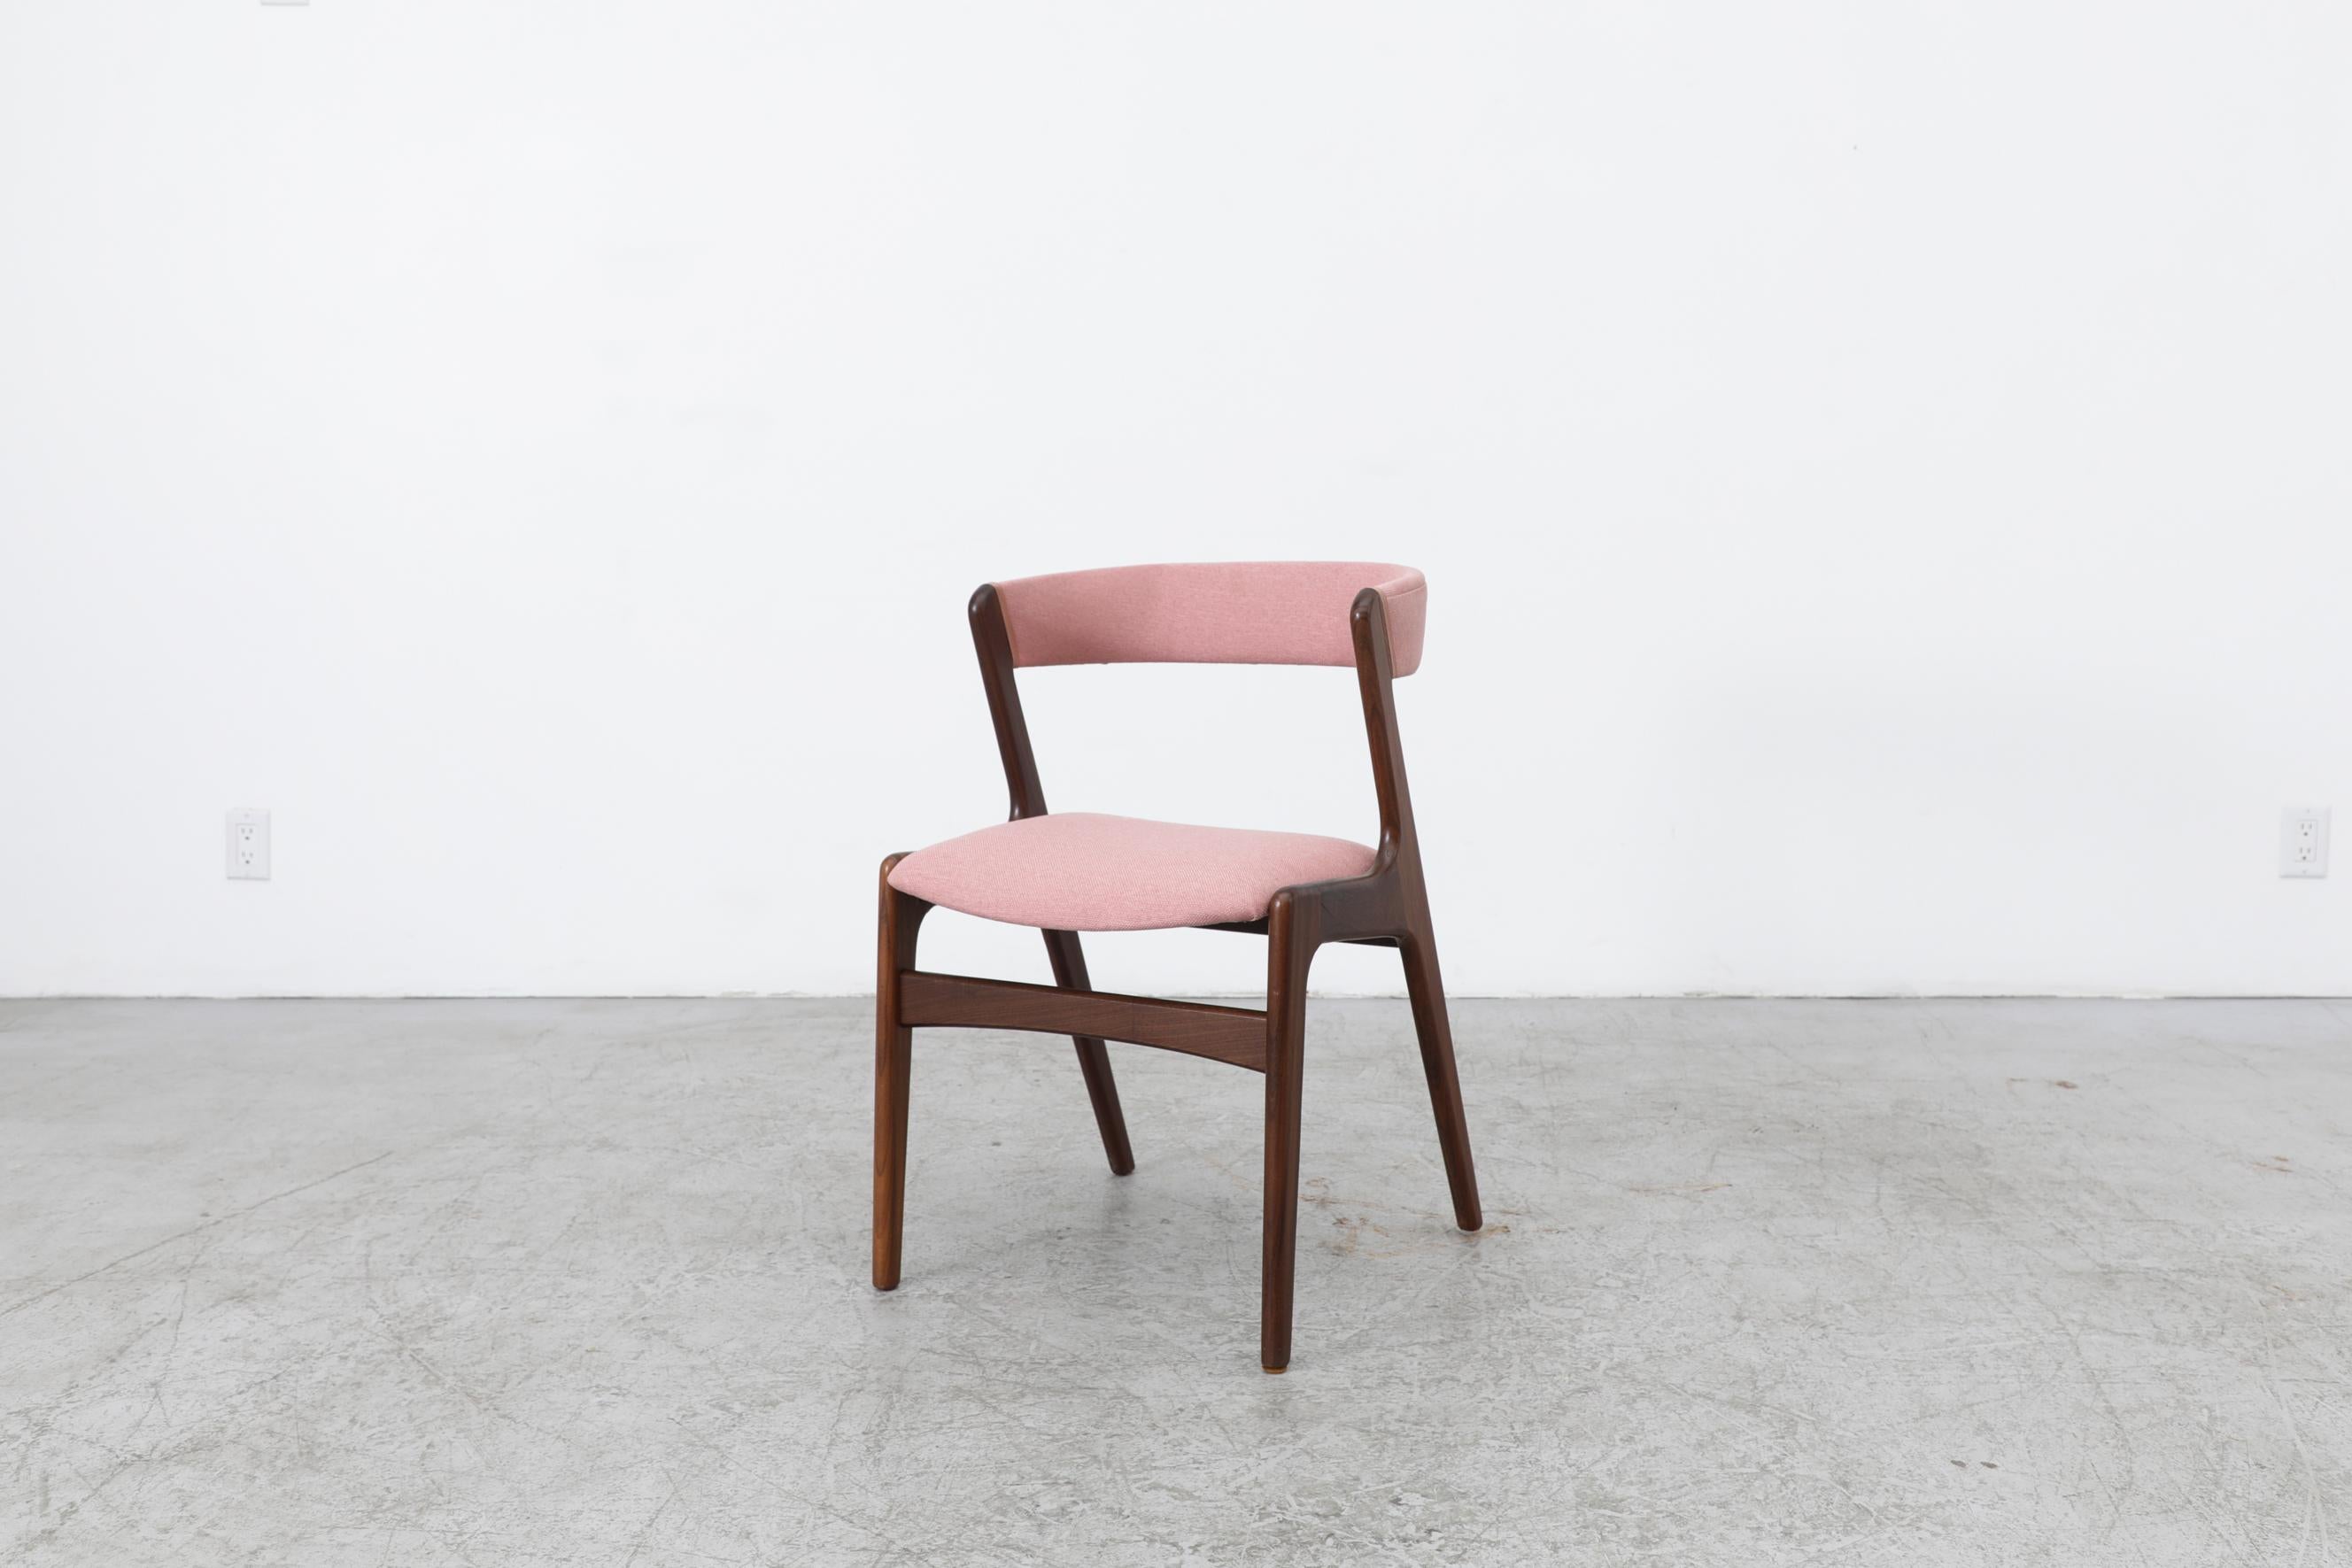 Single pink upholstered Kai Kristiansen chair. In original condition with visible signs of wear including a small crack in the teak. The wear is consistent with its age and use. The seat width is 17.25